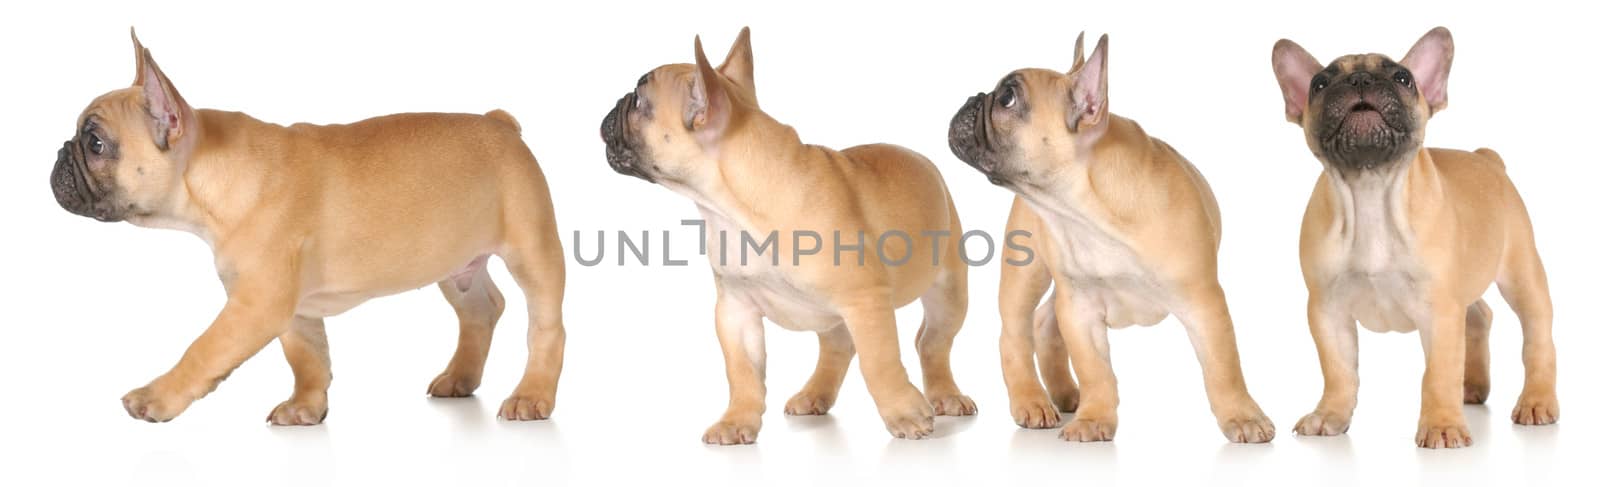 puppy barking and moving series - french bulldog 